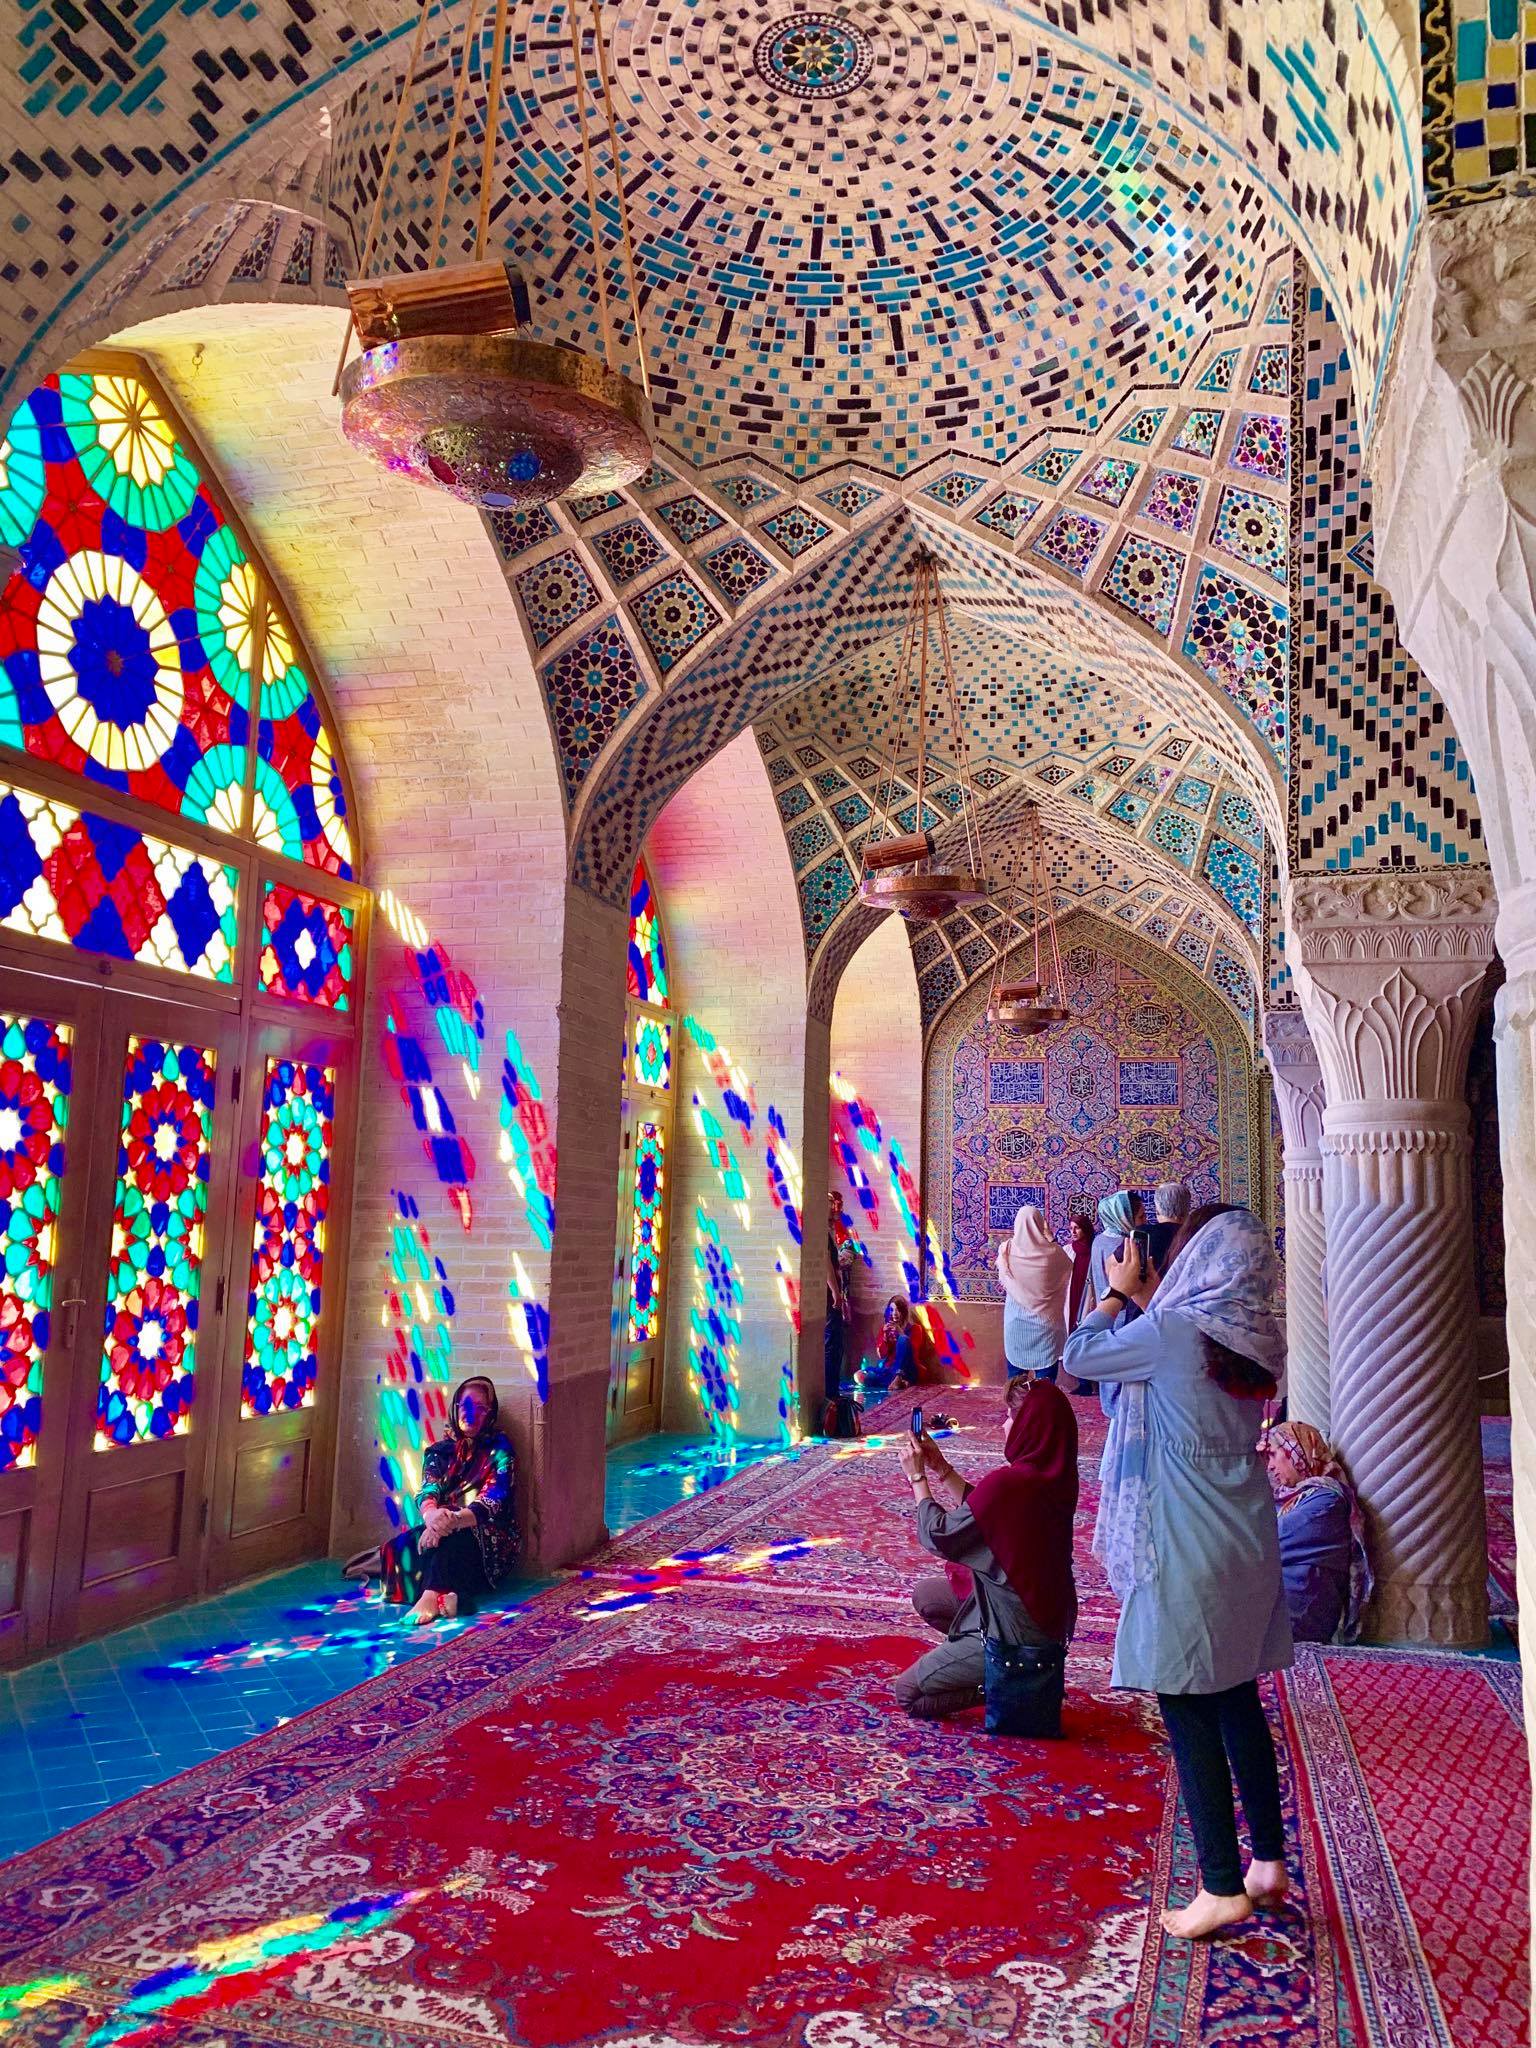 Kach Solo Travels in 2019 Full day tour of Shiraz46.jpg